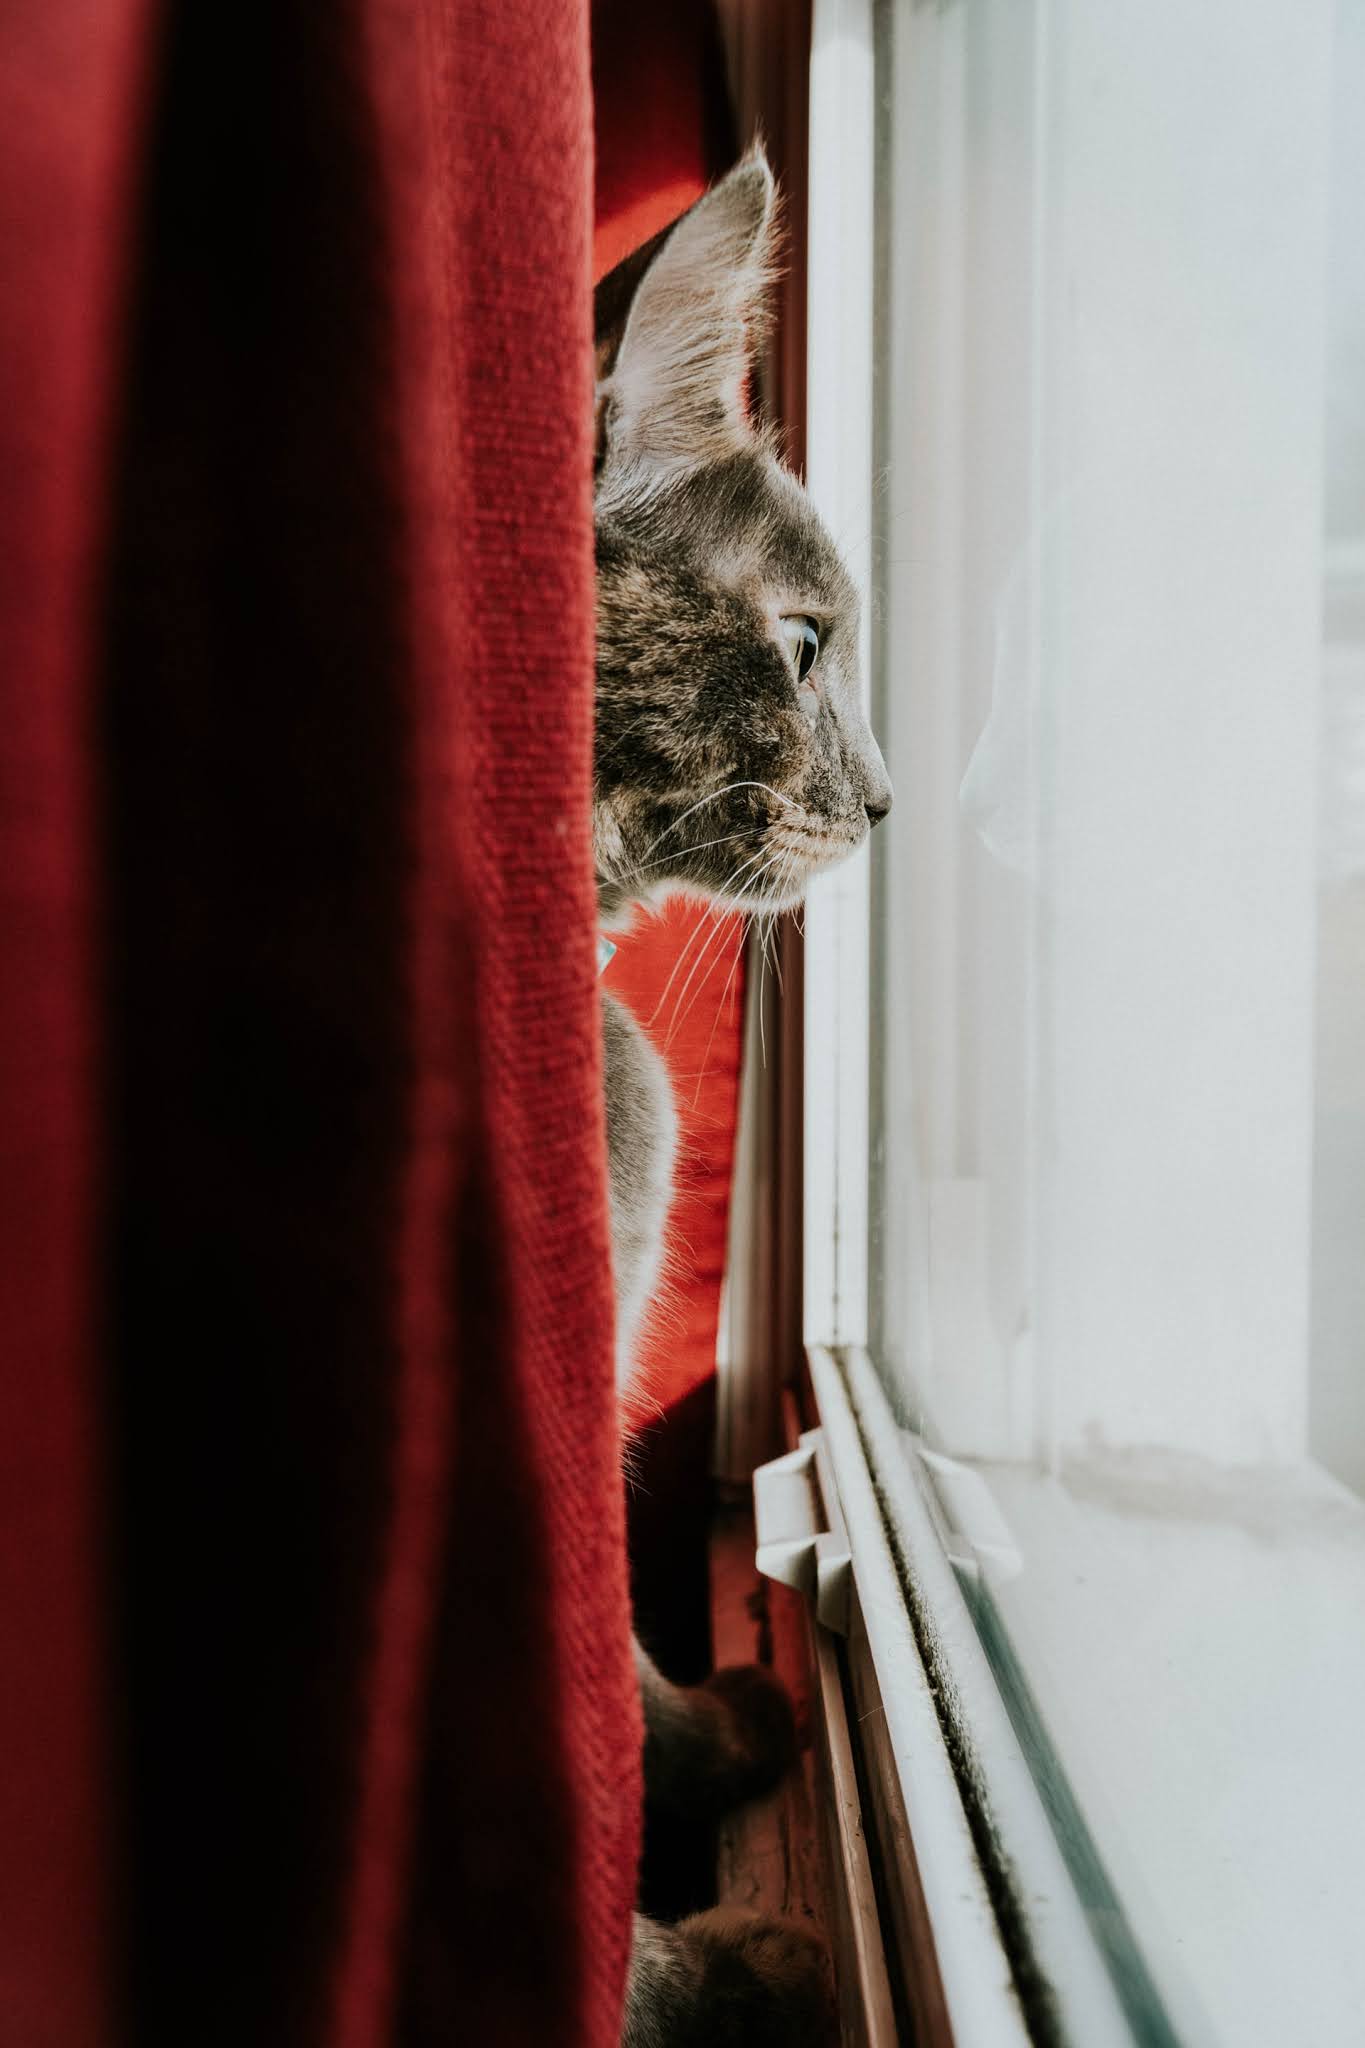  cat in cozy home by the window